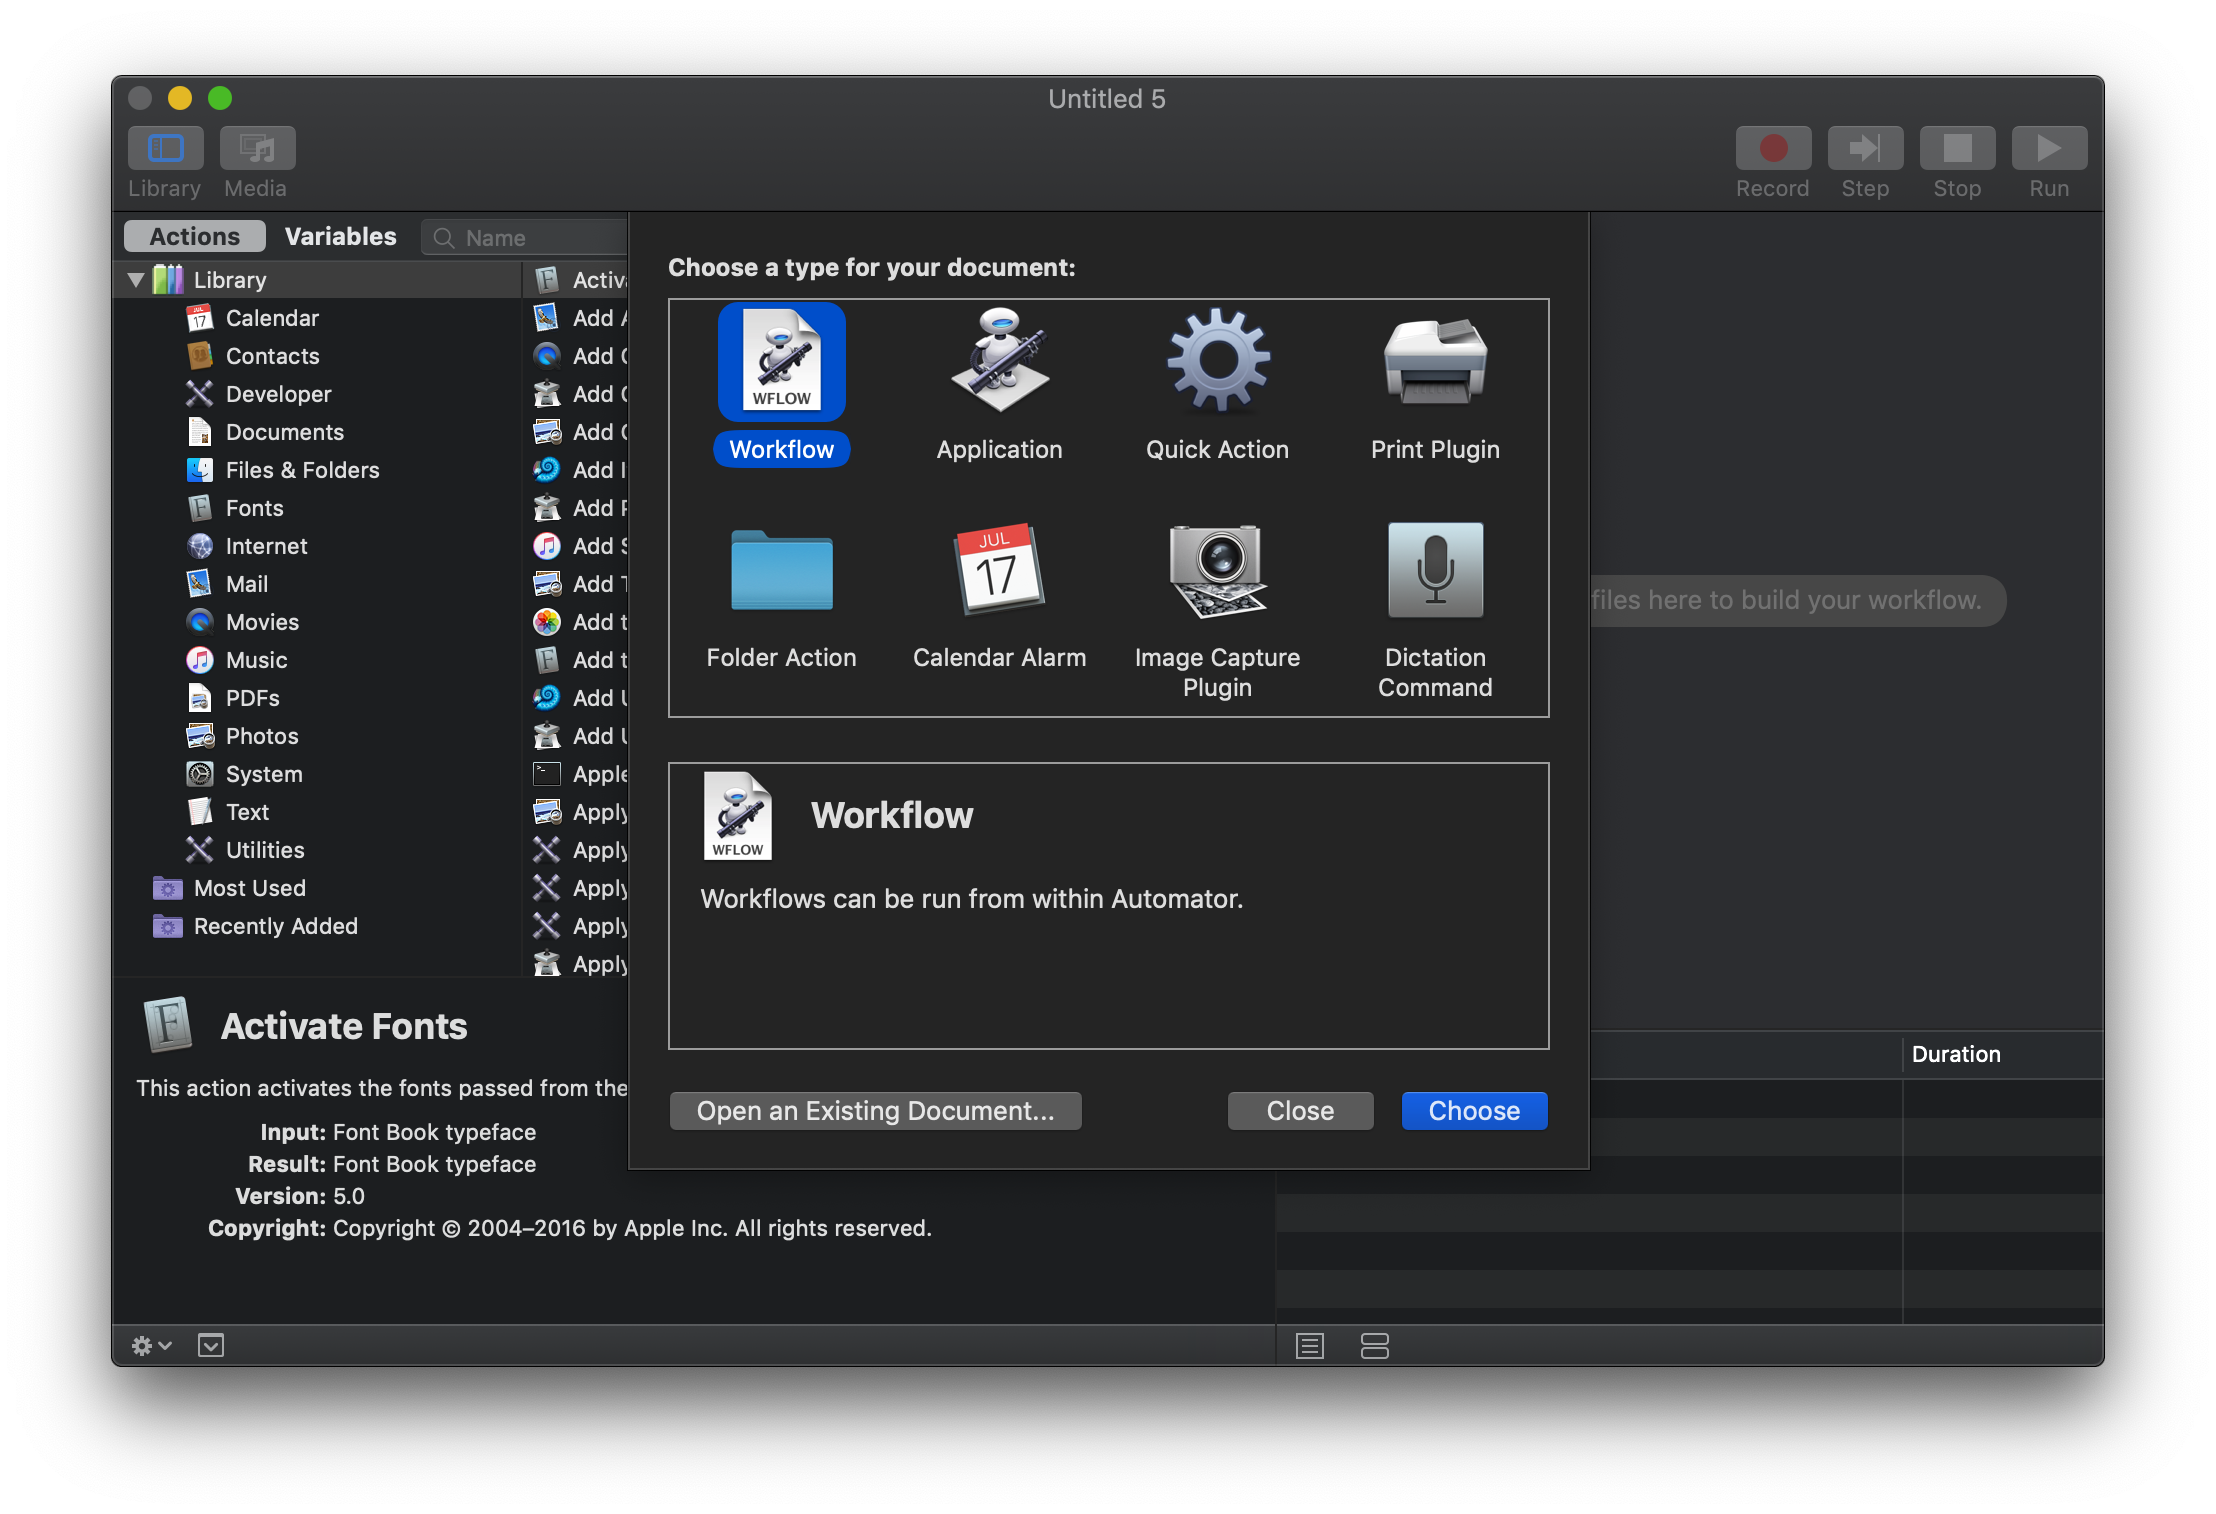 Custom Quick Actions can be built in Automator.